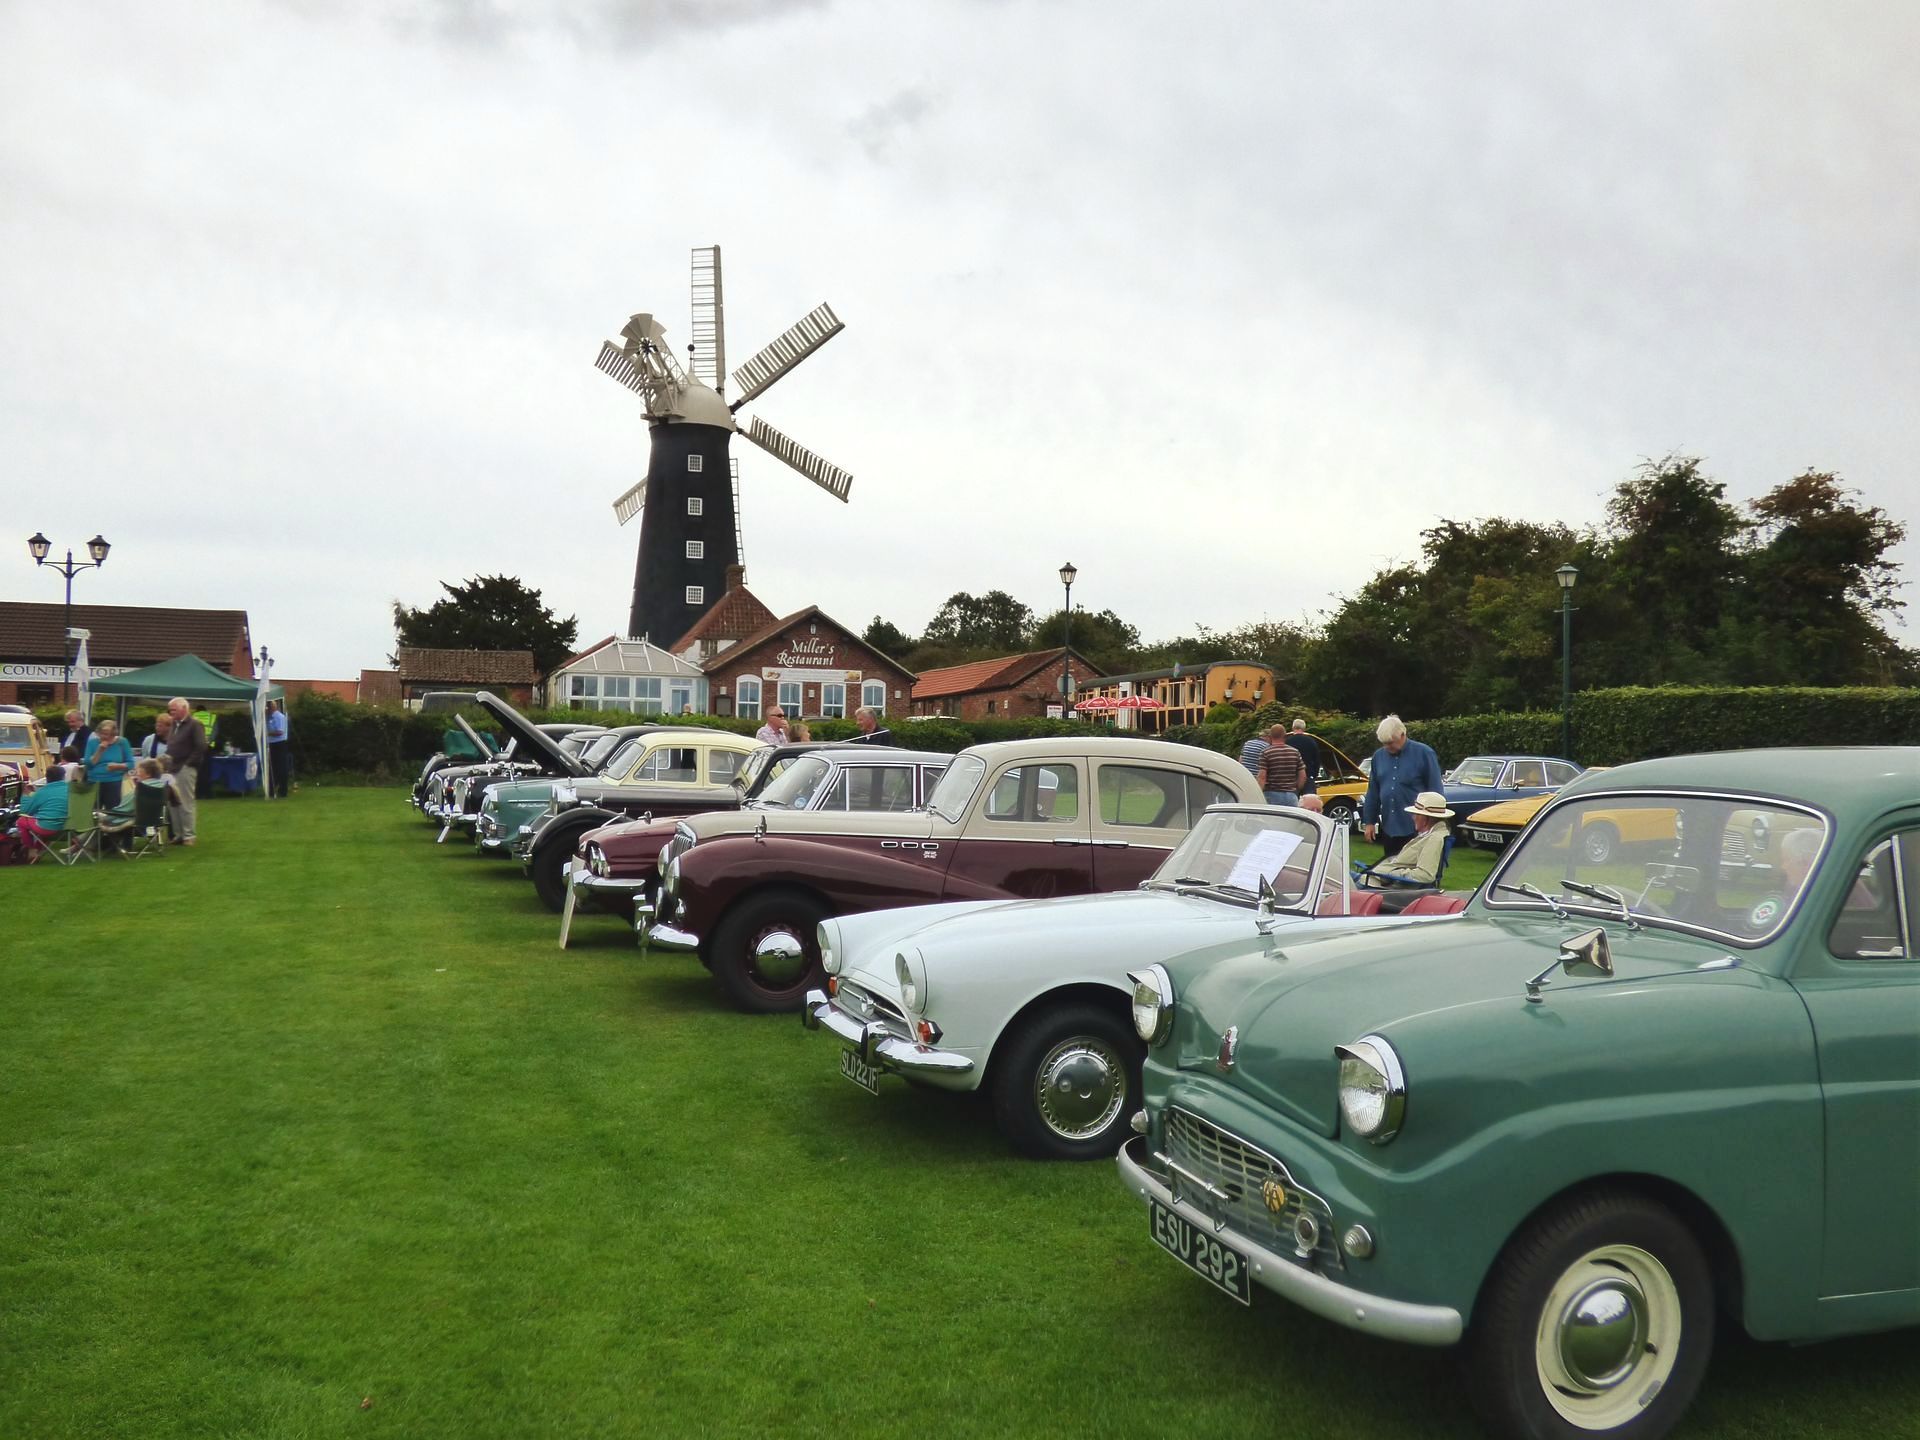 A row of old cars are parked in a grassy field with a windmill in the background